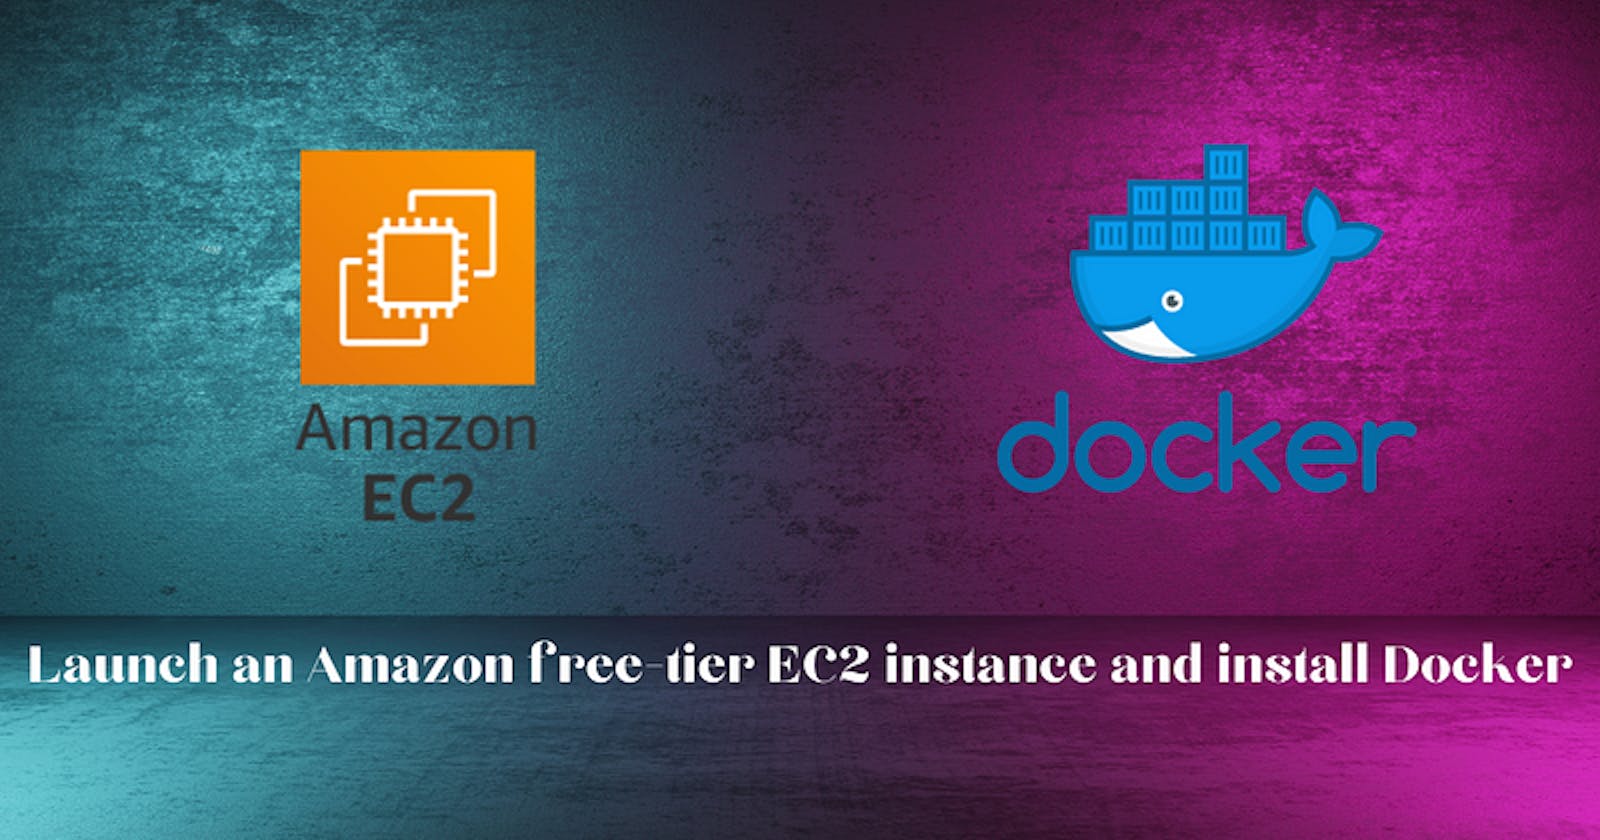 Launch an Amazon free-tier EC2 instance and install Docker